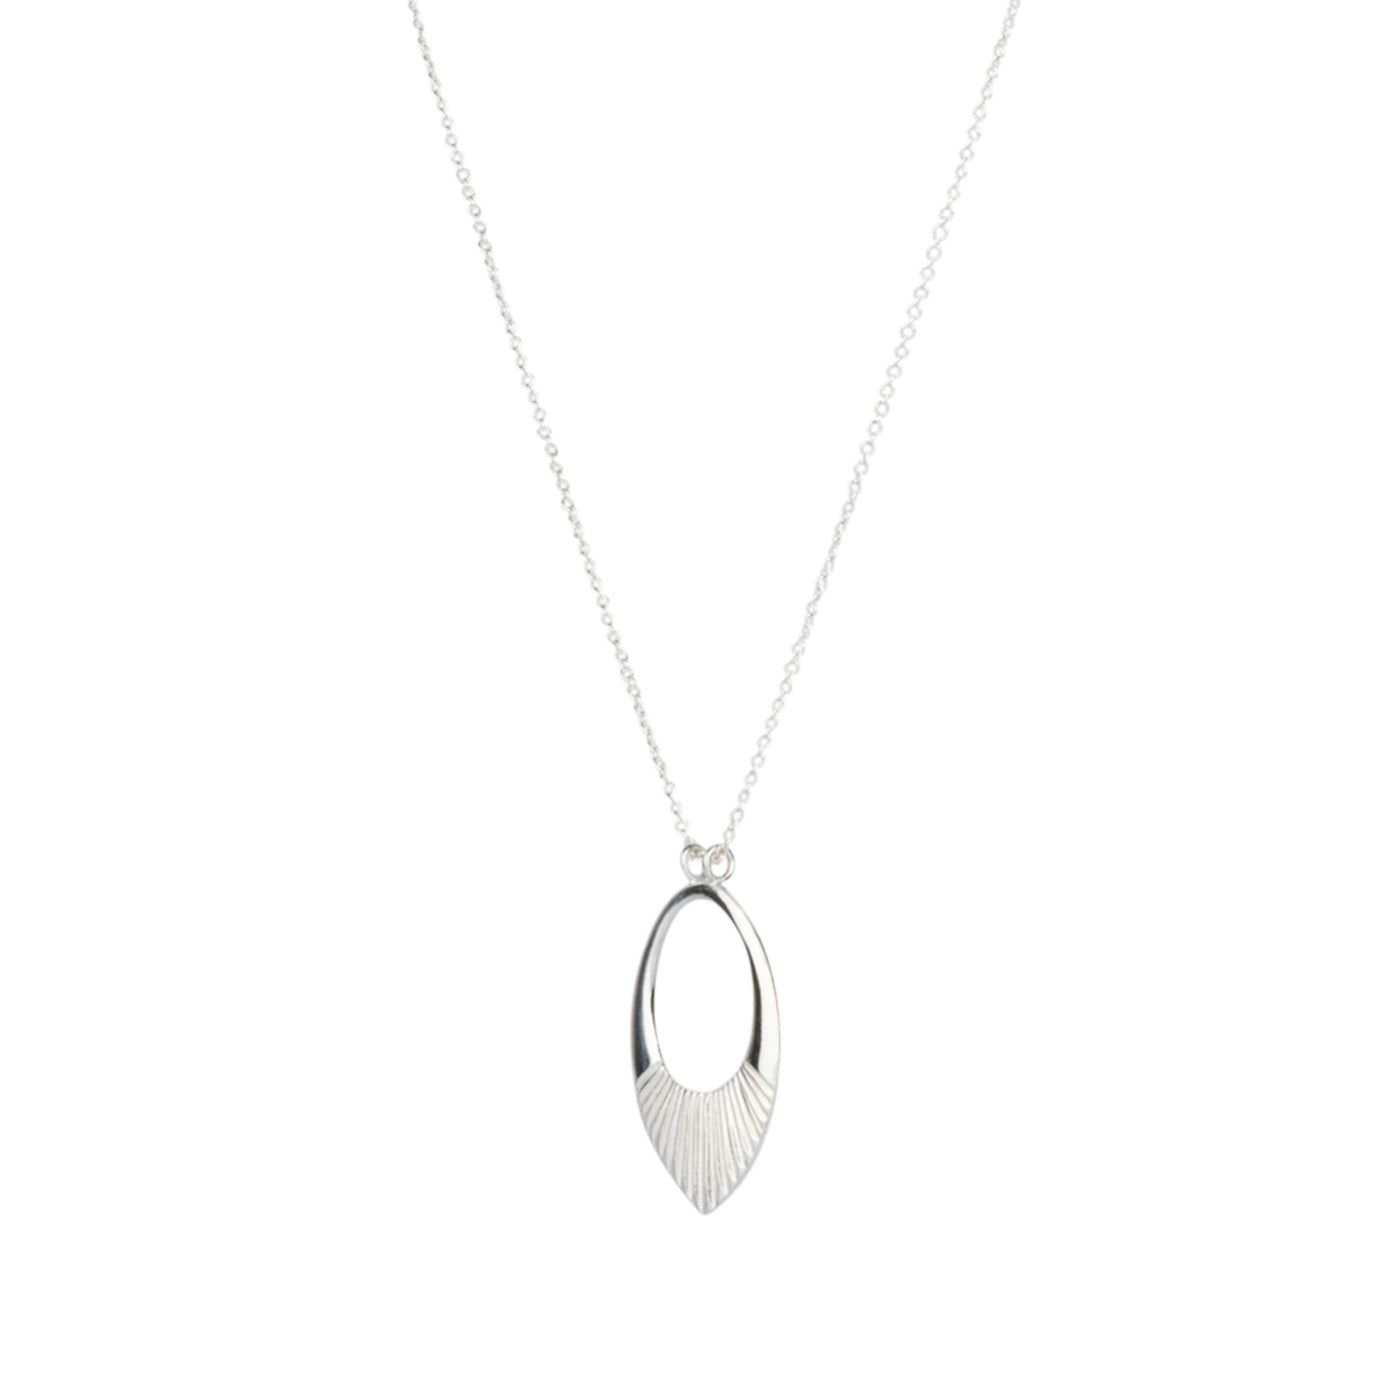 Side view silver medium open petal shape pendant with a textured bottom on a 22" silver chain on a white background